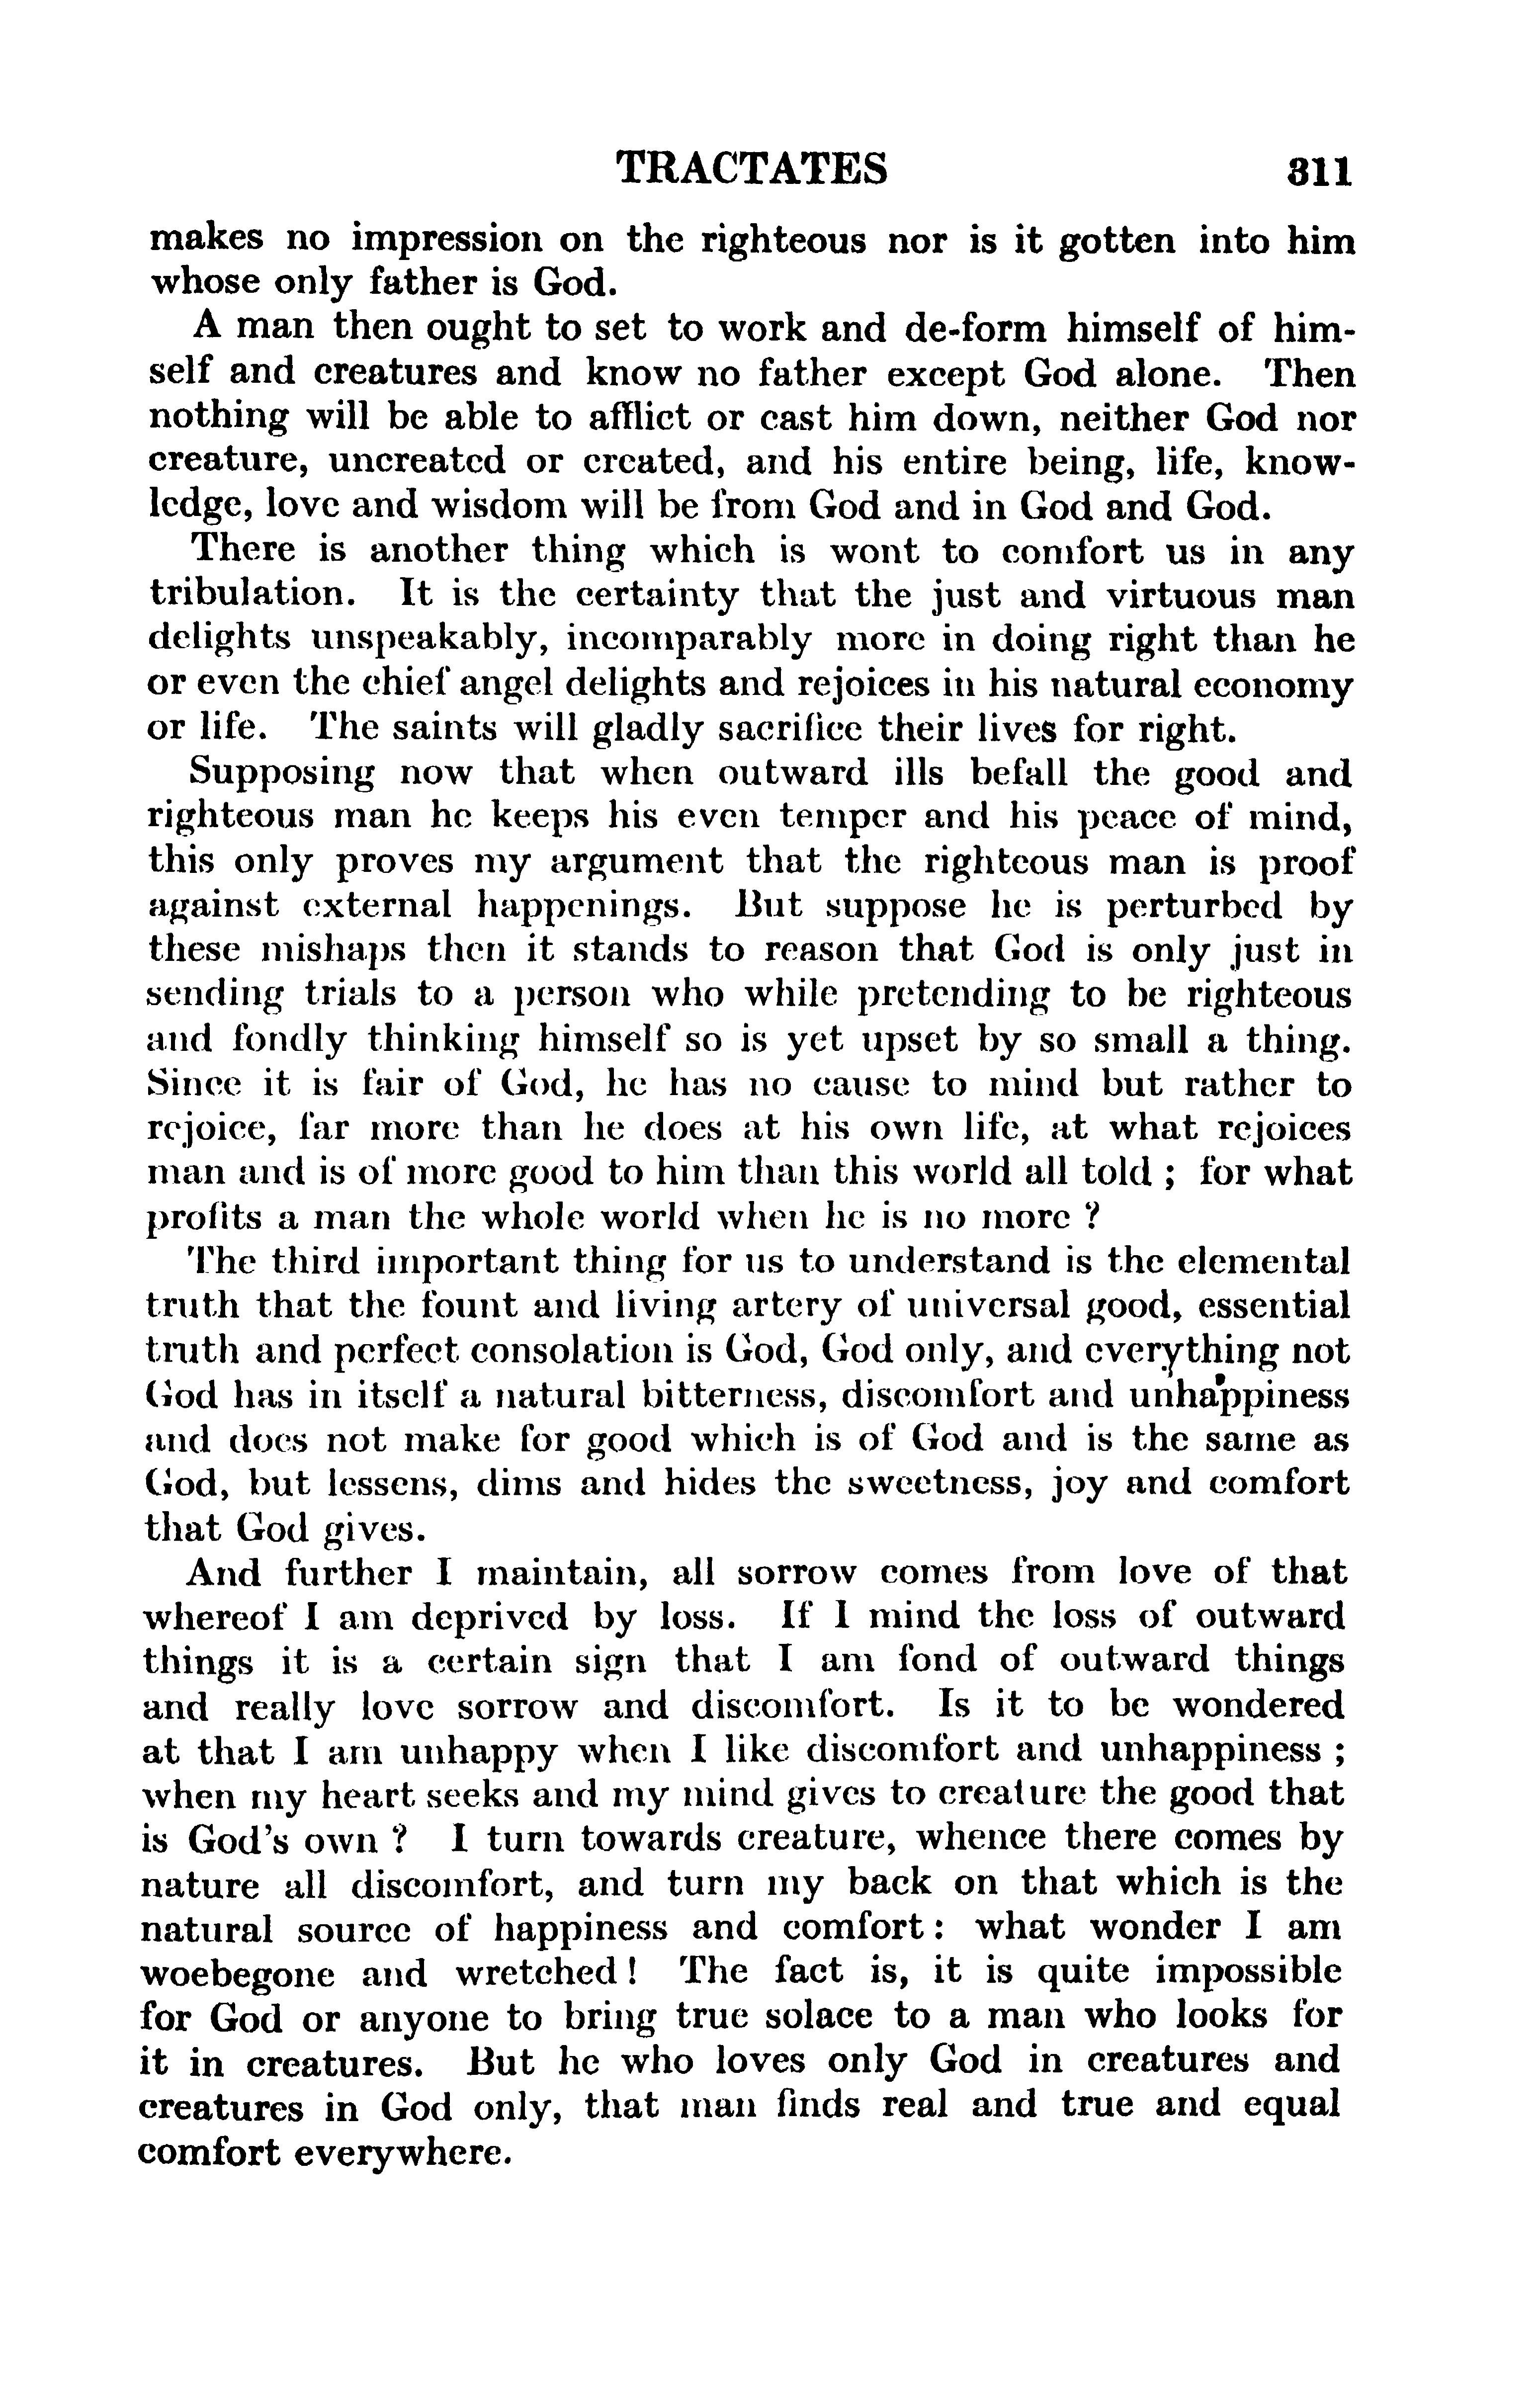 Image of page 0335